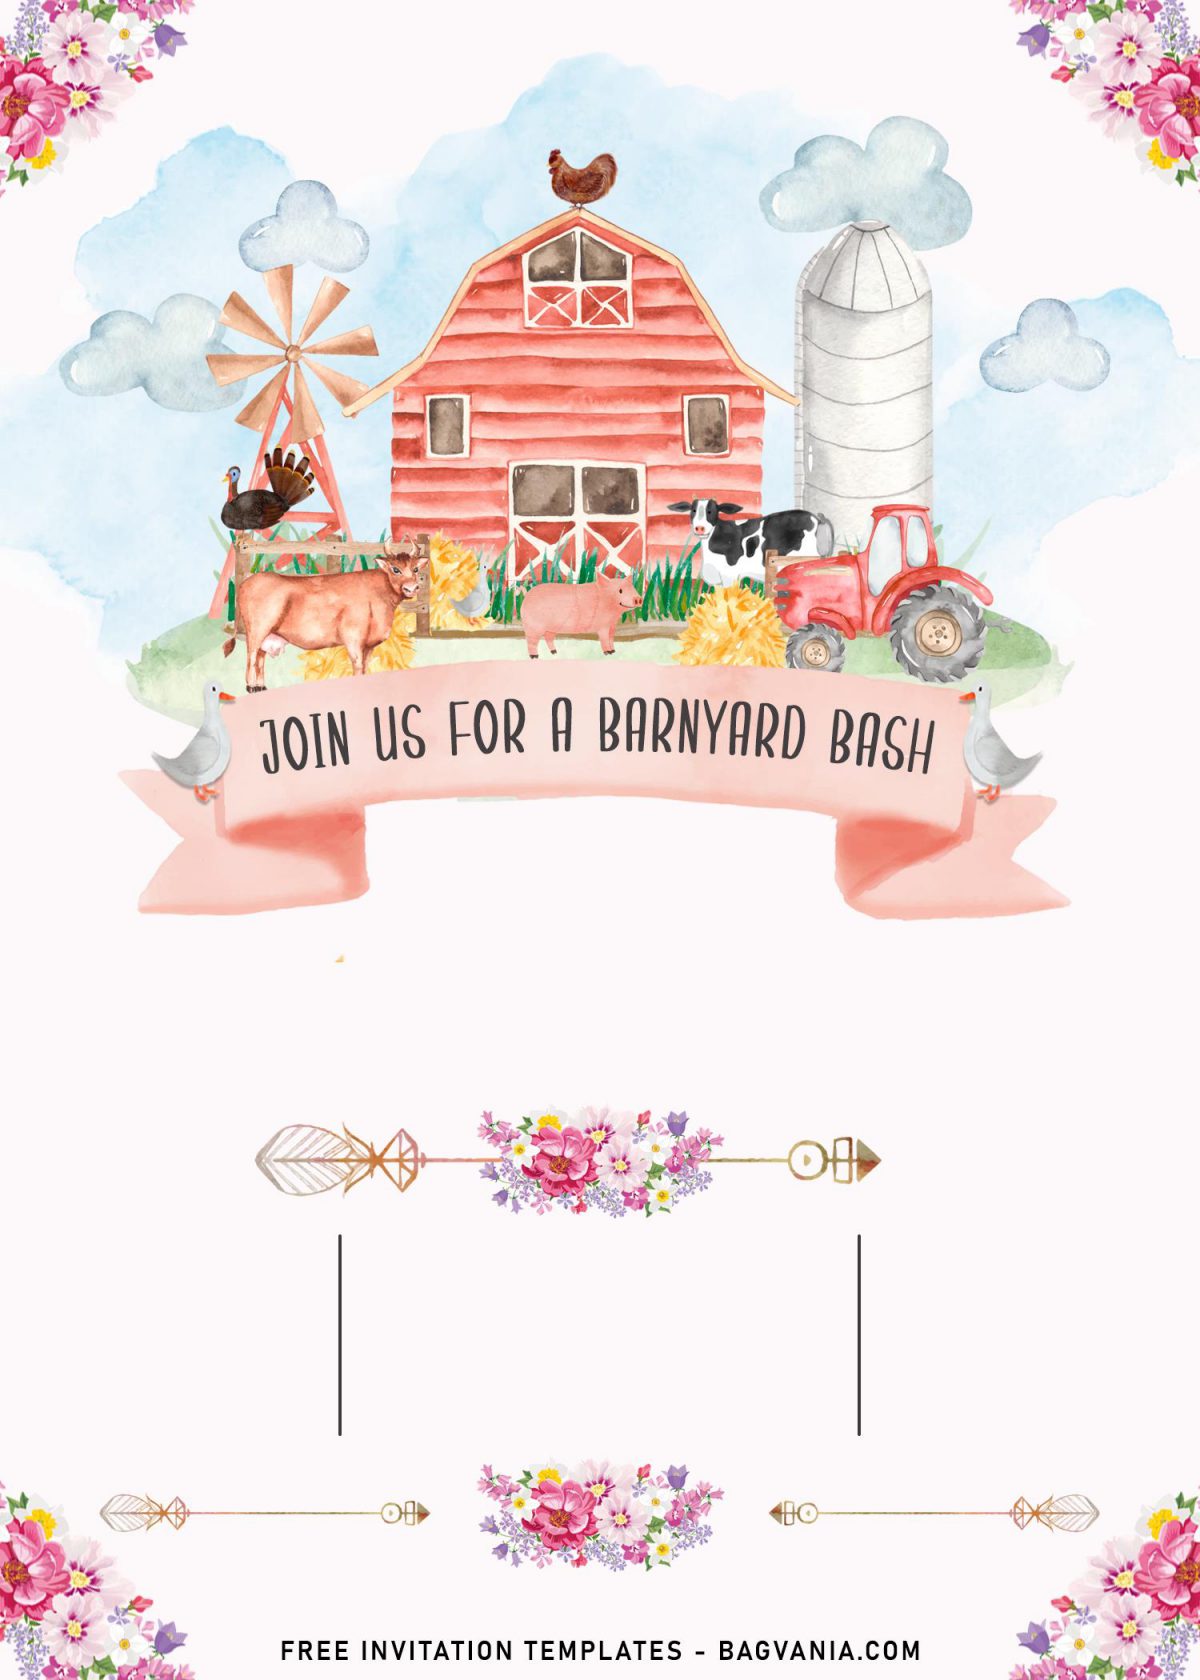 11+ Whimsical Farm Birthday Party Invitation Templates and has watercolor painting of windmill